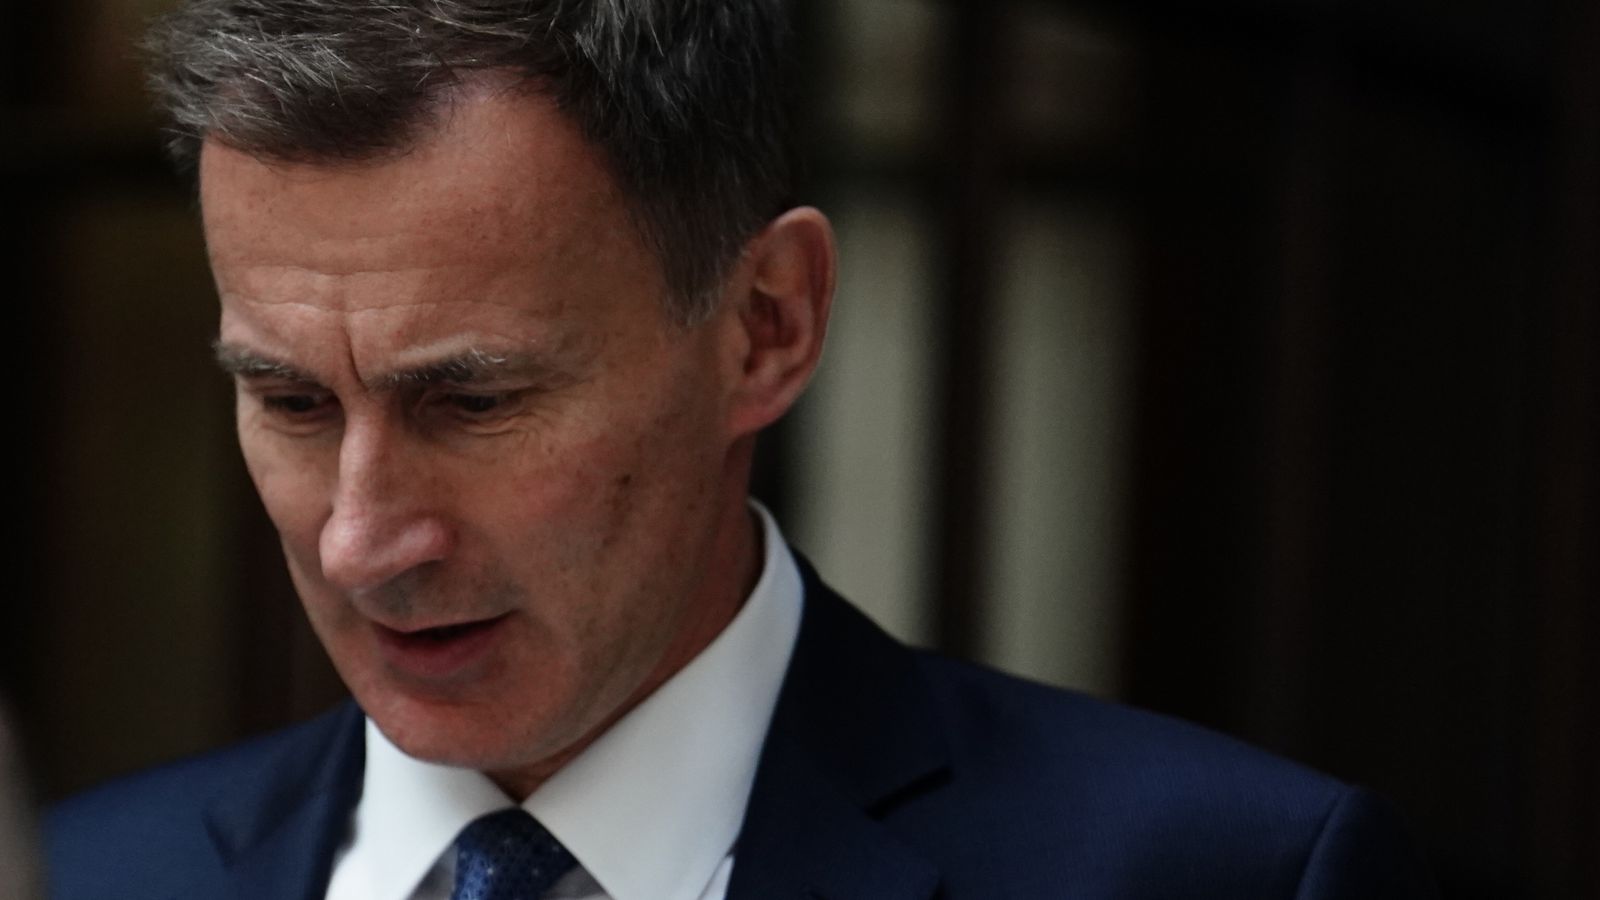 Chancellor Jeremy Hunt warns of 'public sector waste' crackdown after government borrowing lower than expected